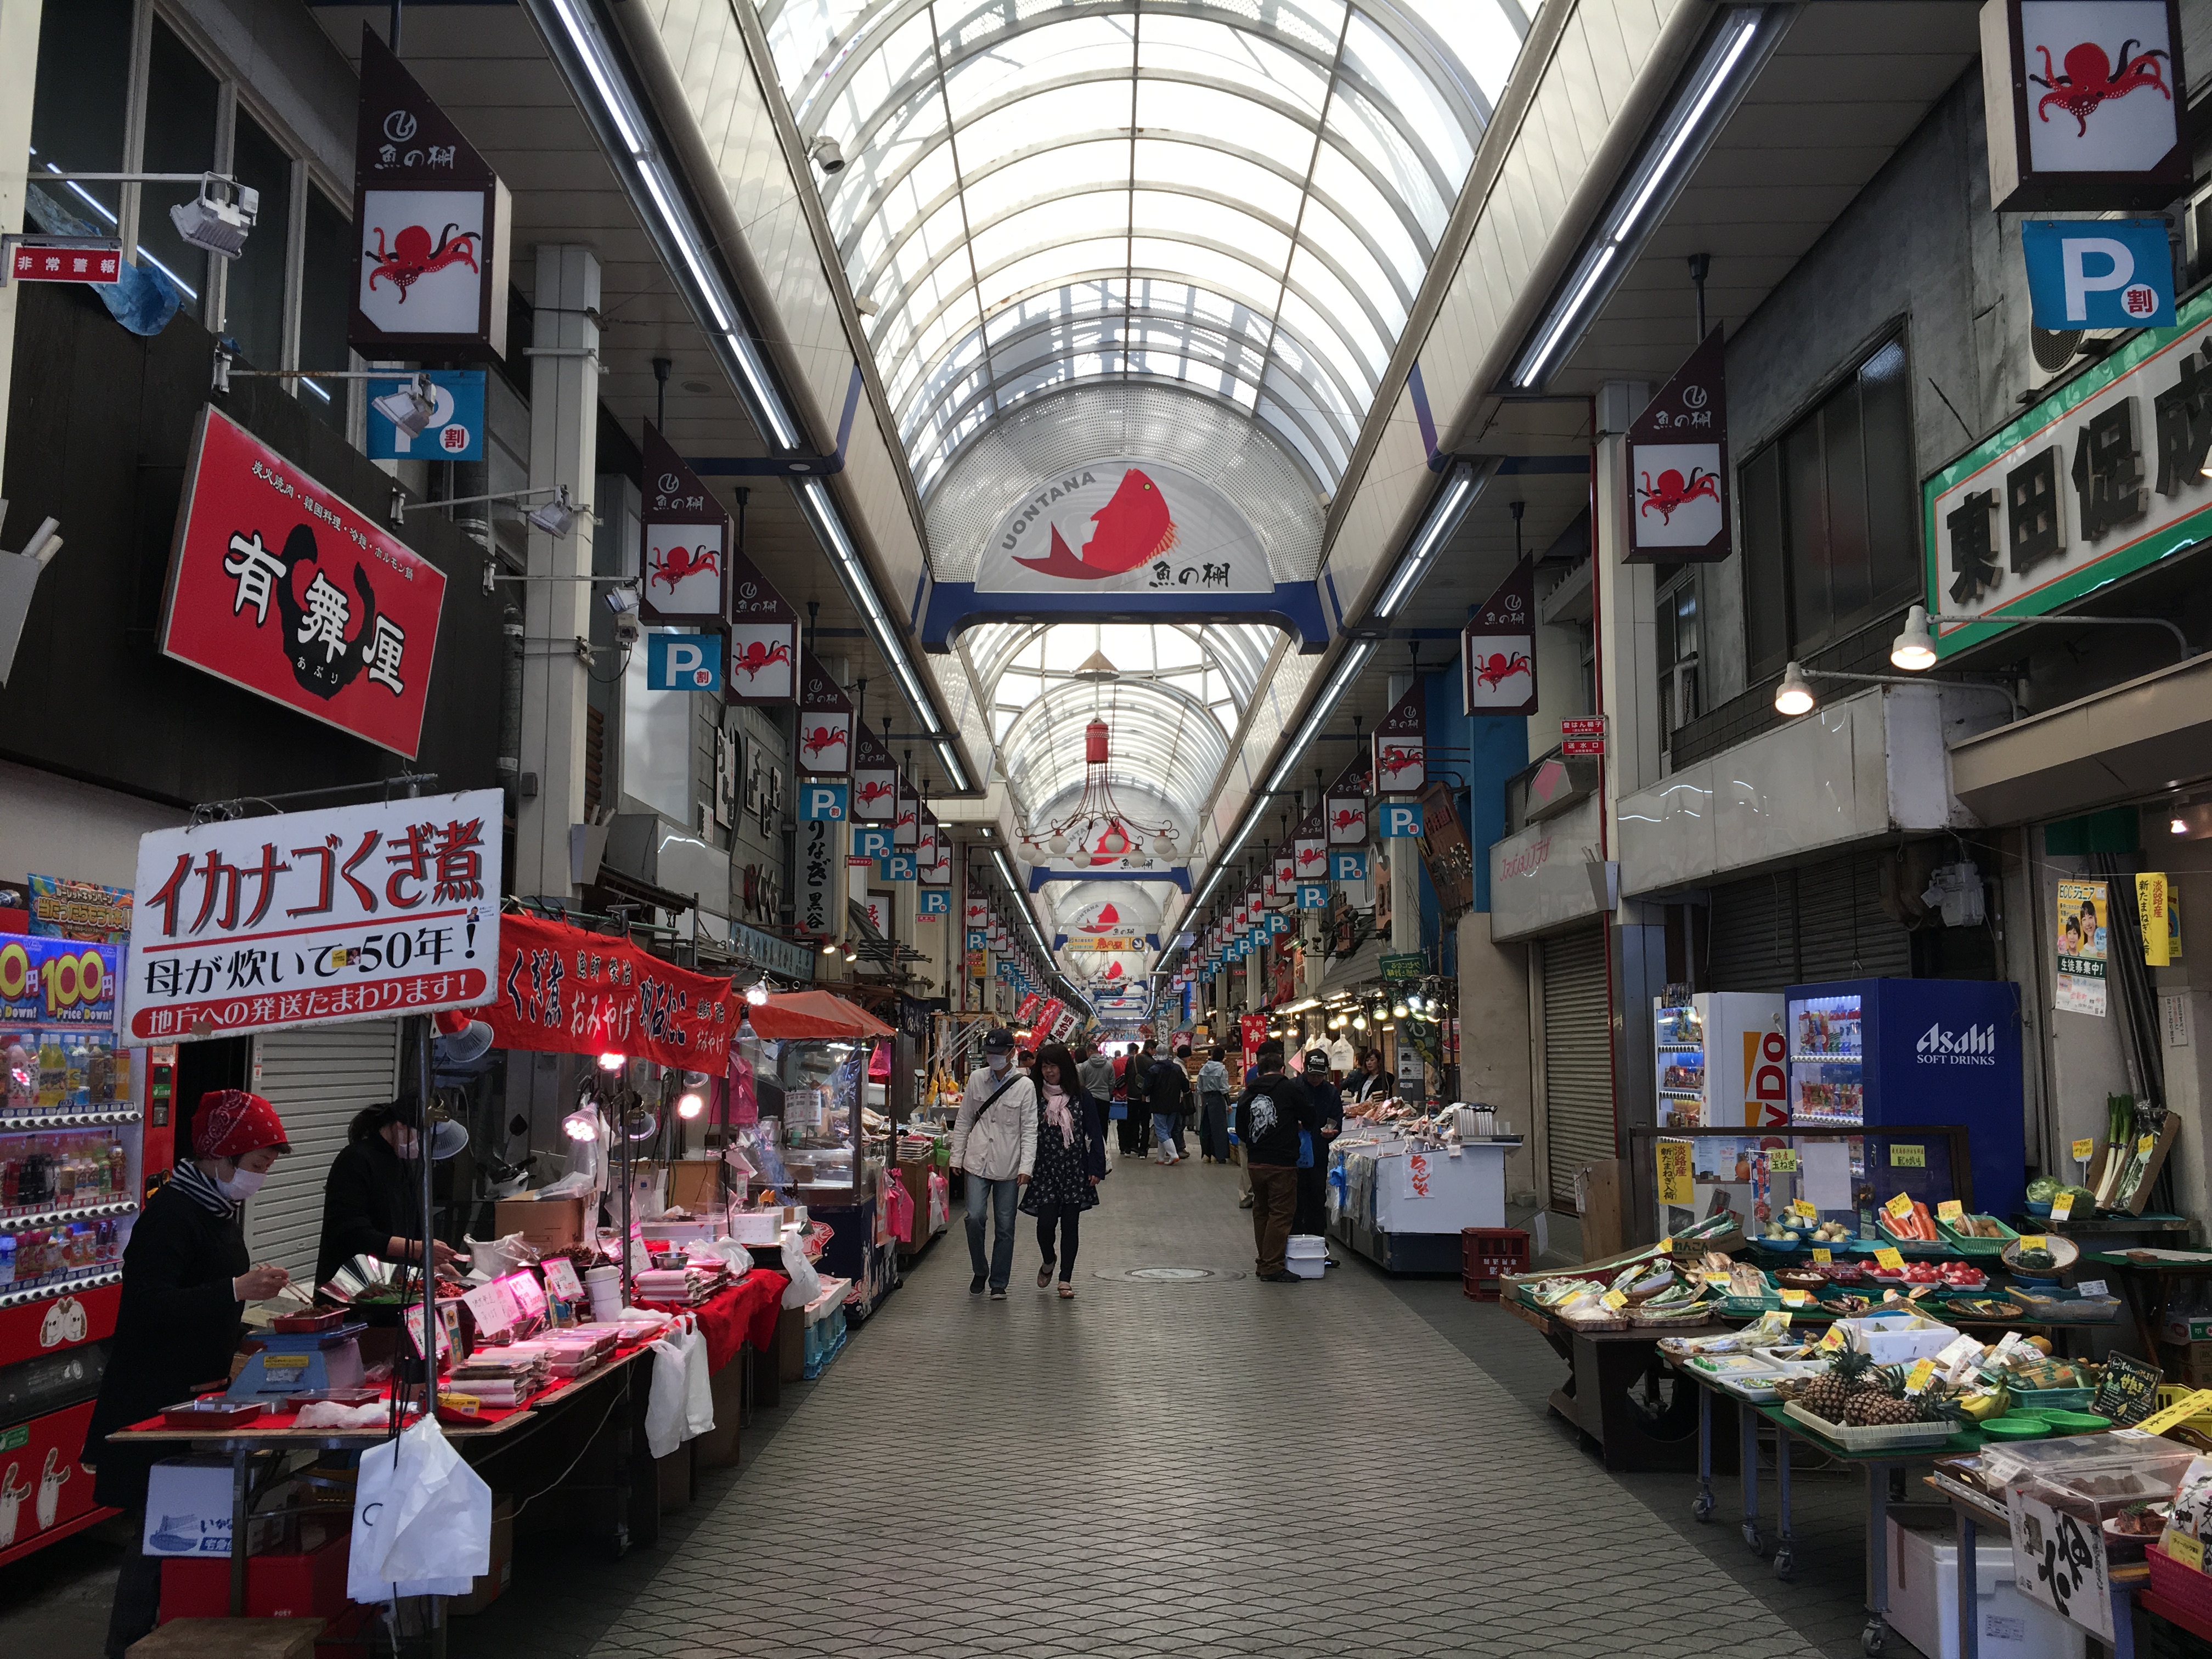 stalls and shops offering various kinds of seafood on the Uo no Tana Shopping Street in Akashi, Japan.